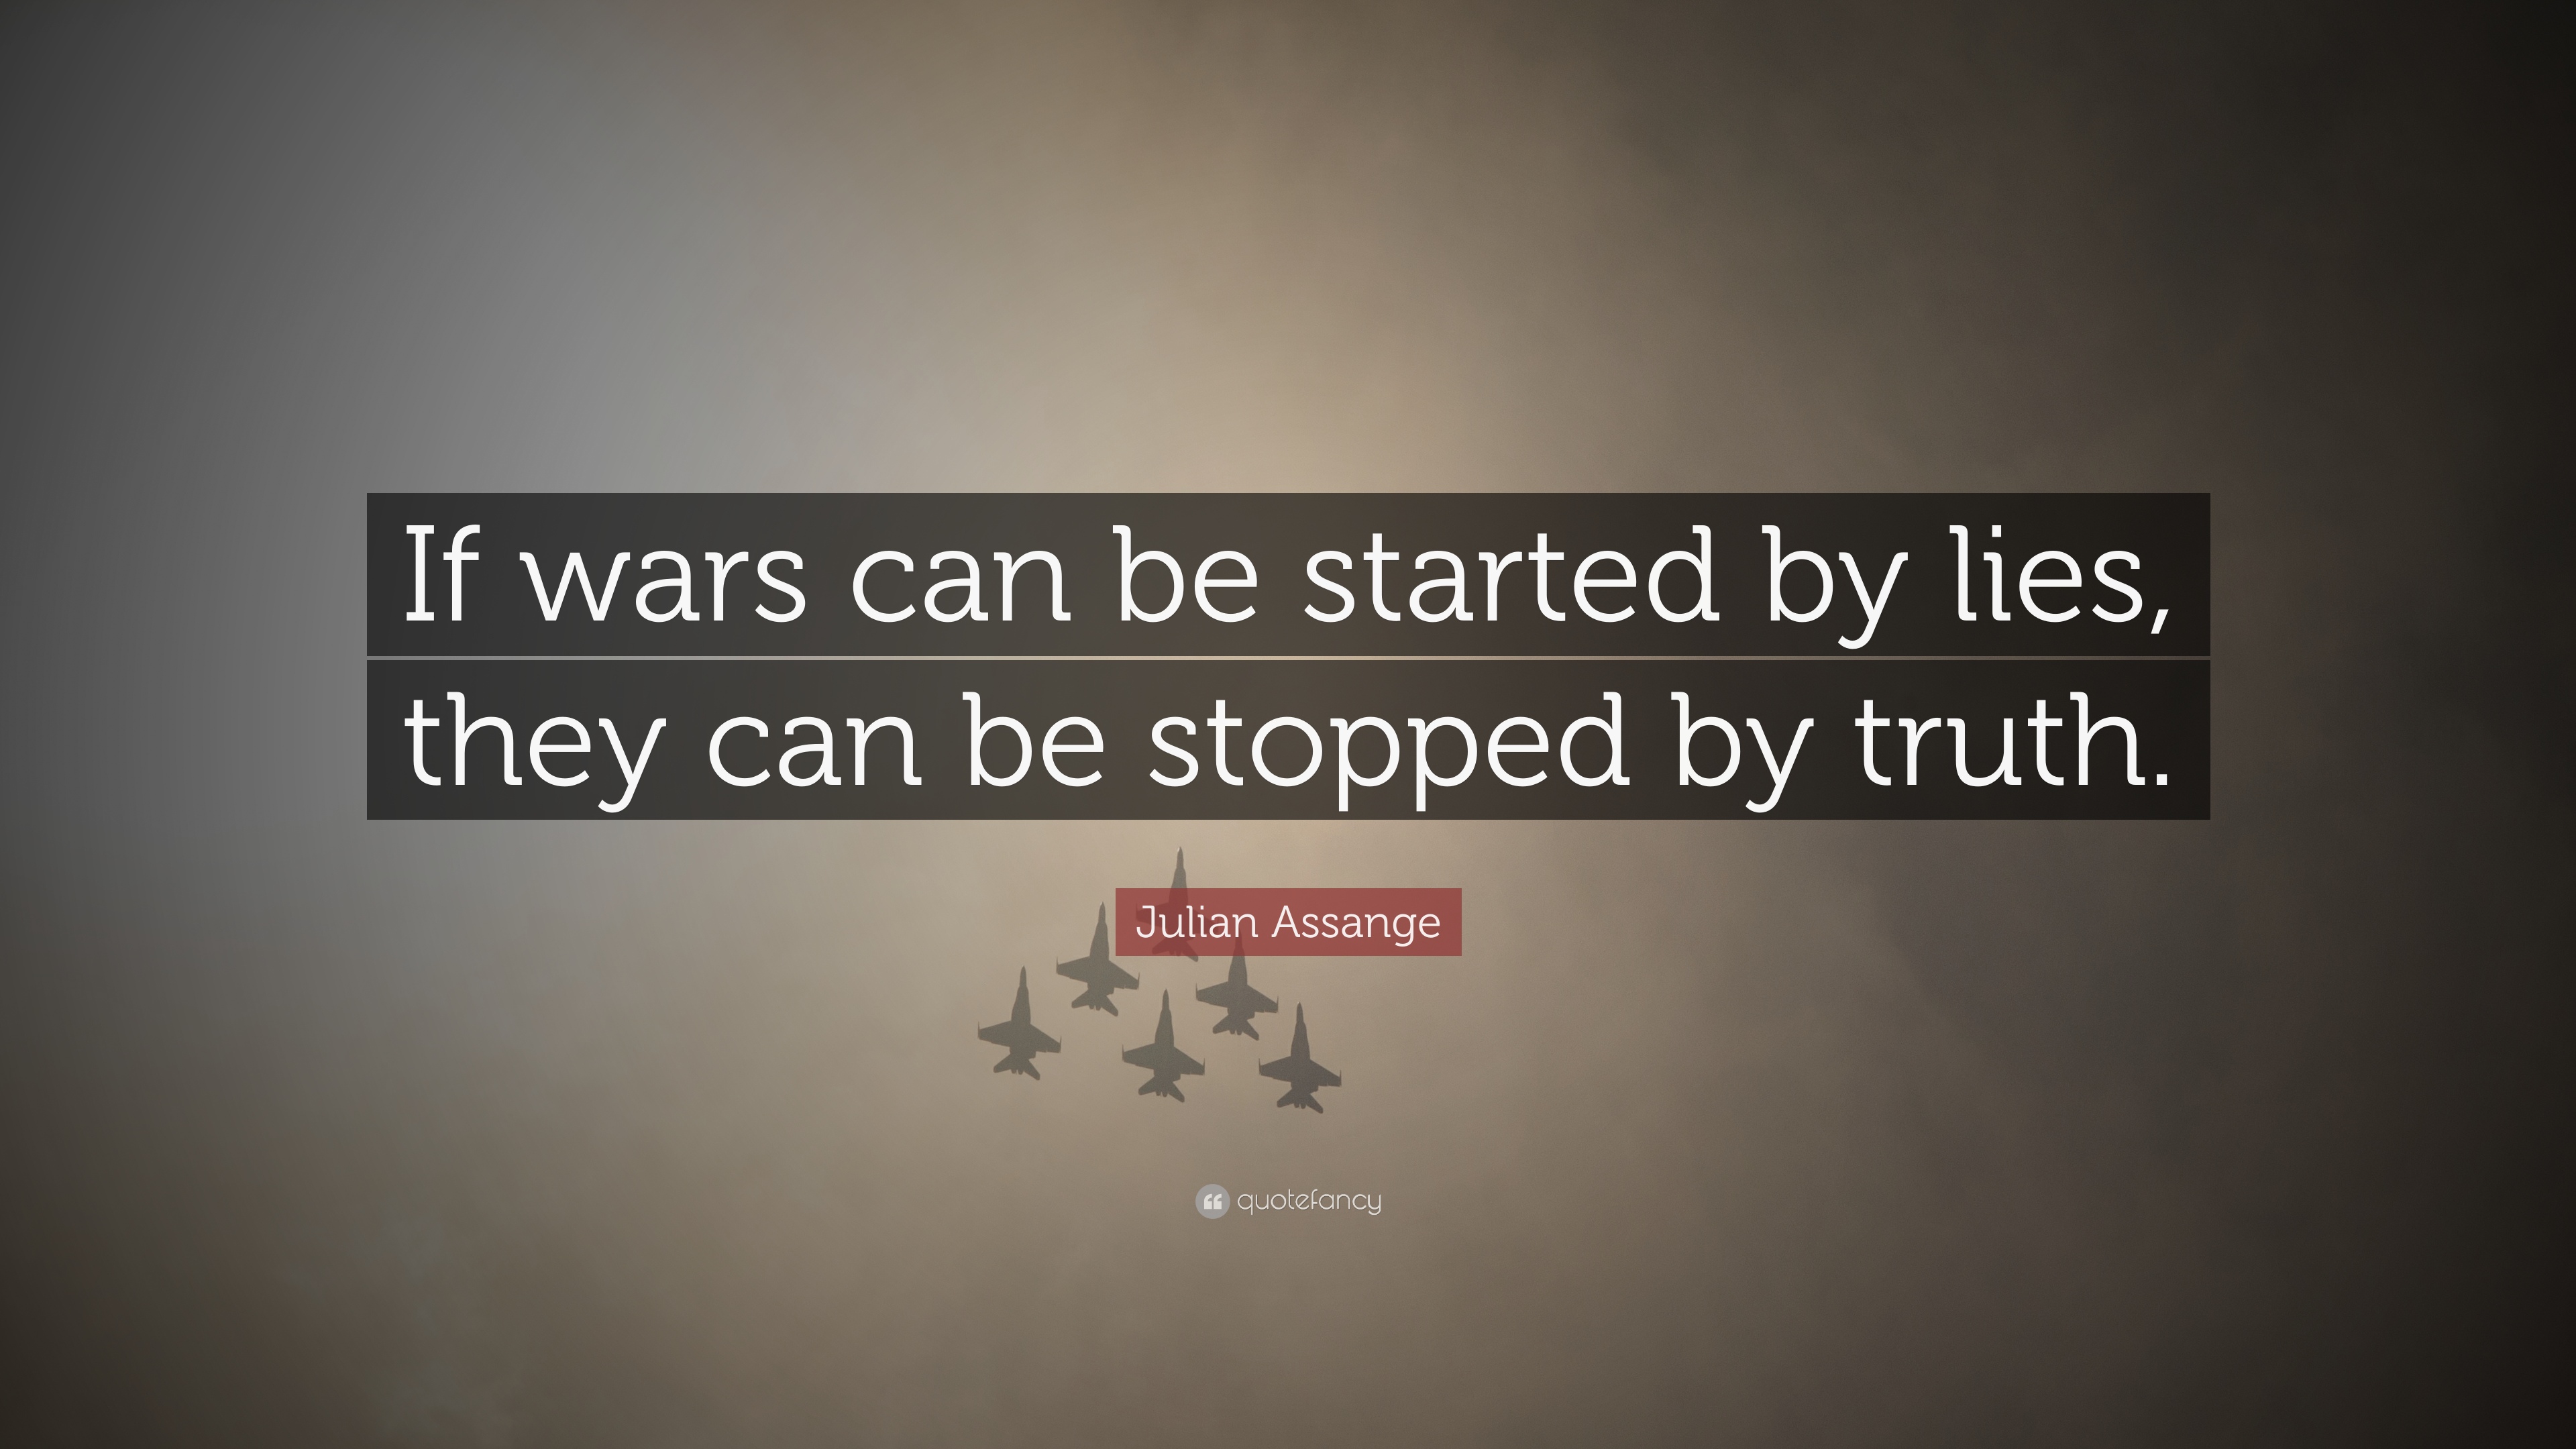 Quotes About War (2021 Update)